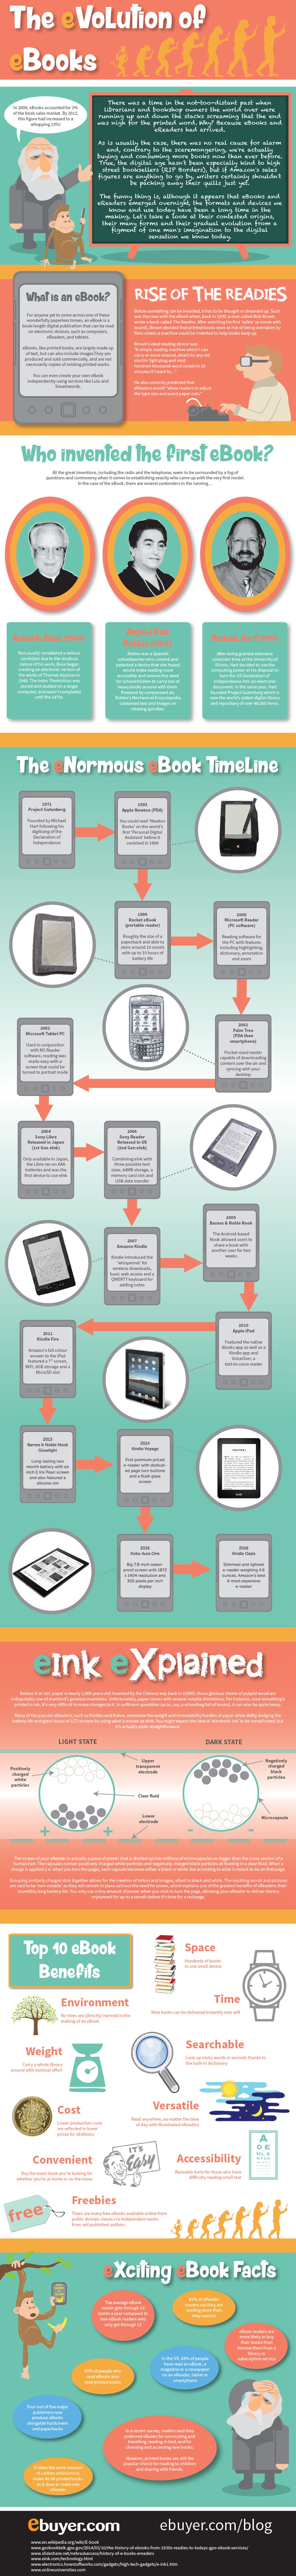 The Evolution of eBooks Infographic